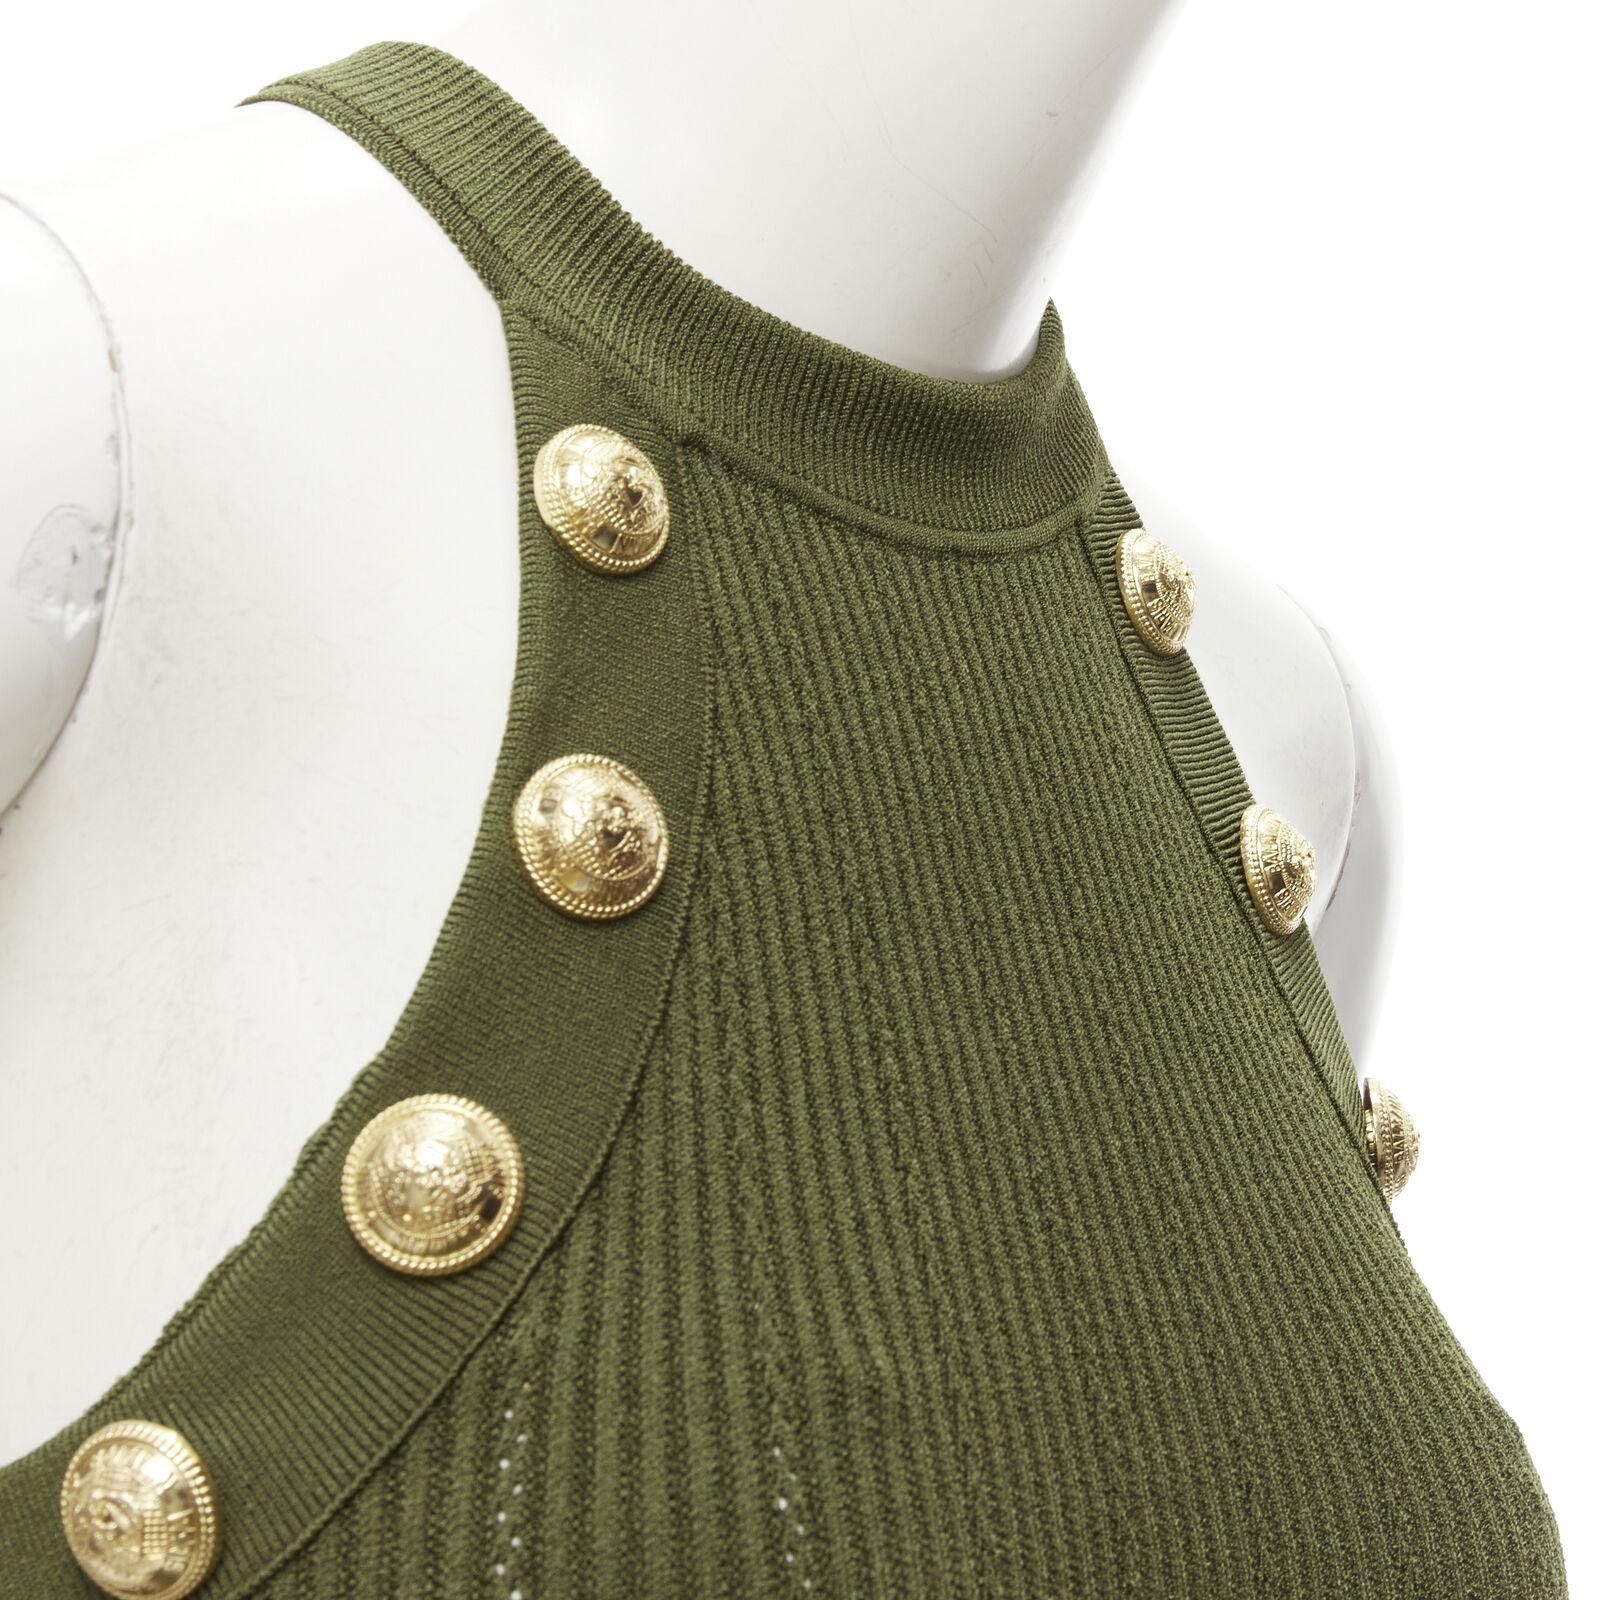 BALMAIN 2021 green viscose knit gold military button halter top FR34 XS
Reference: AAWC/A00215
Brand: Balmain
Designer: Olivier Rousteing
Collection: 2021
Material: Viscose, Polyester
Color: Green, Gold
Pattern: Solid
Extra Details: Decorative